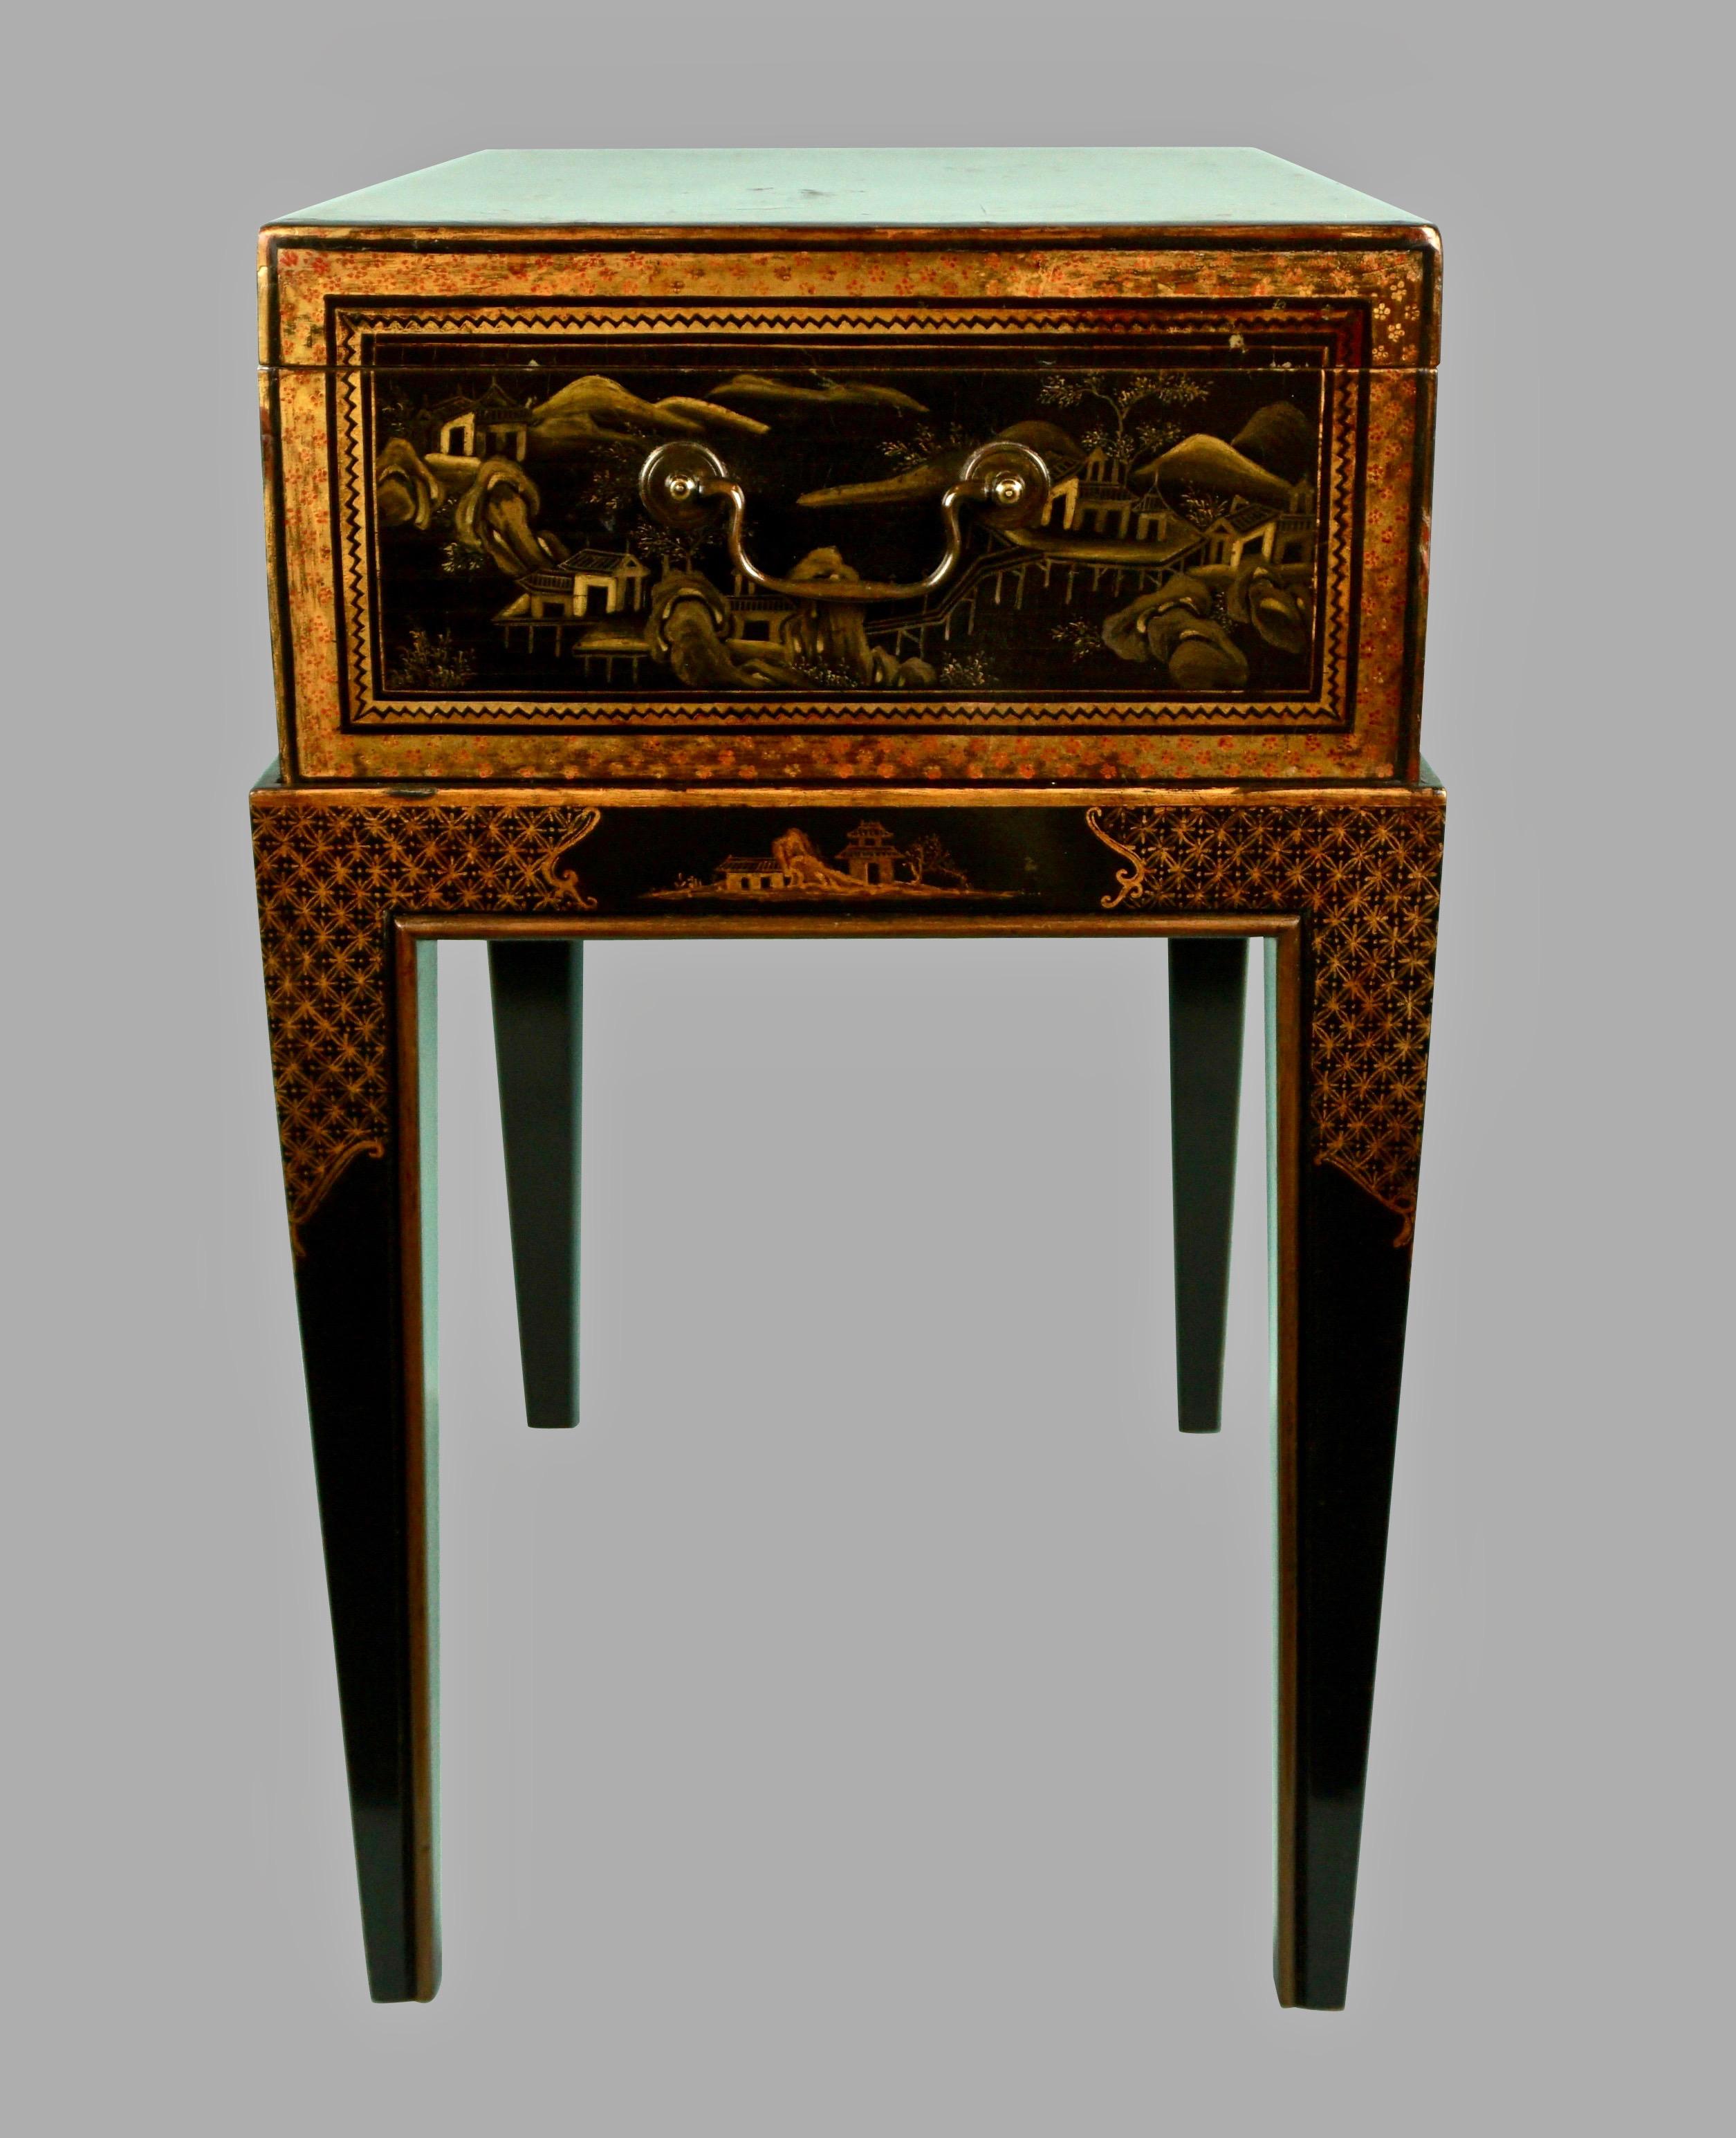 Chinese Export Black Lacquer Writing or Work Box on Later Custom Stand 1